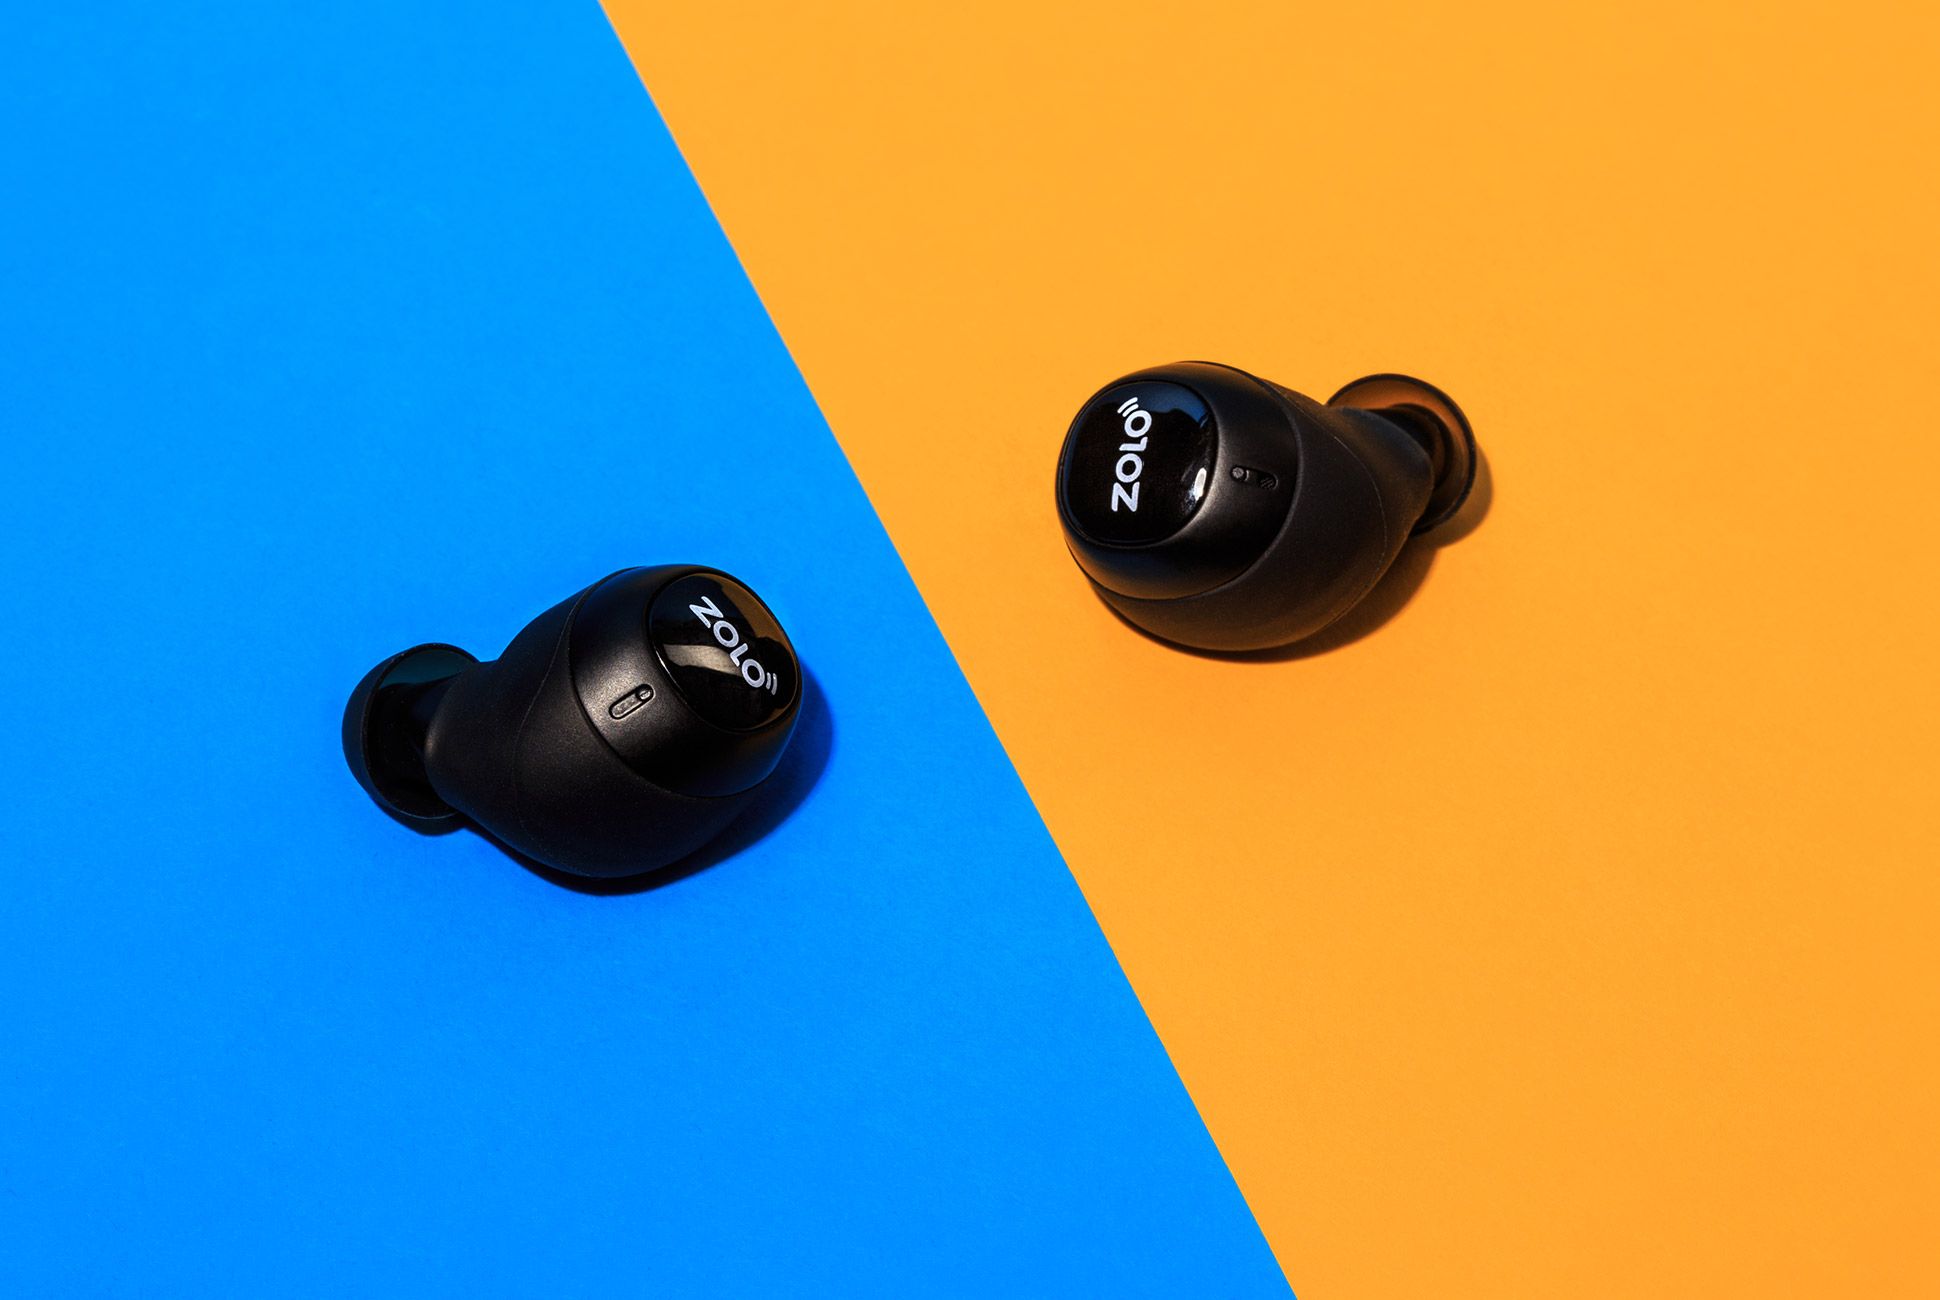 How Do Anker's $99 Wireless EarBuds Stack Up to AirPods?